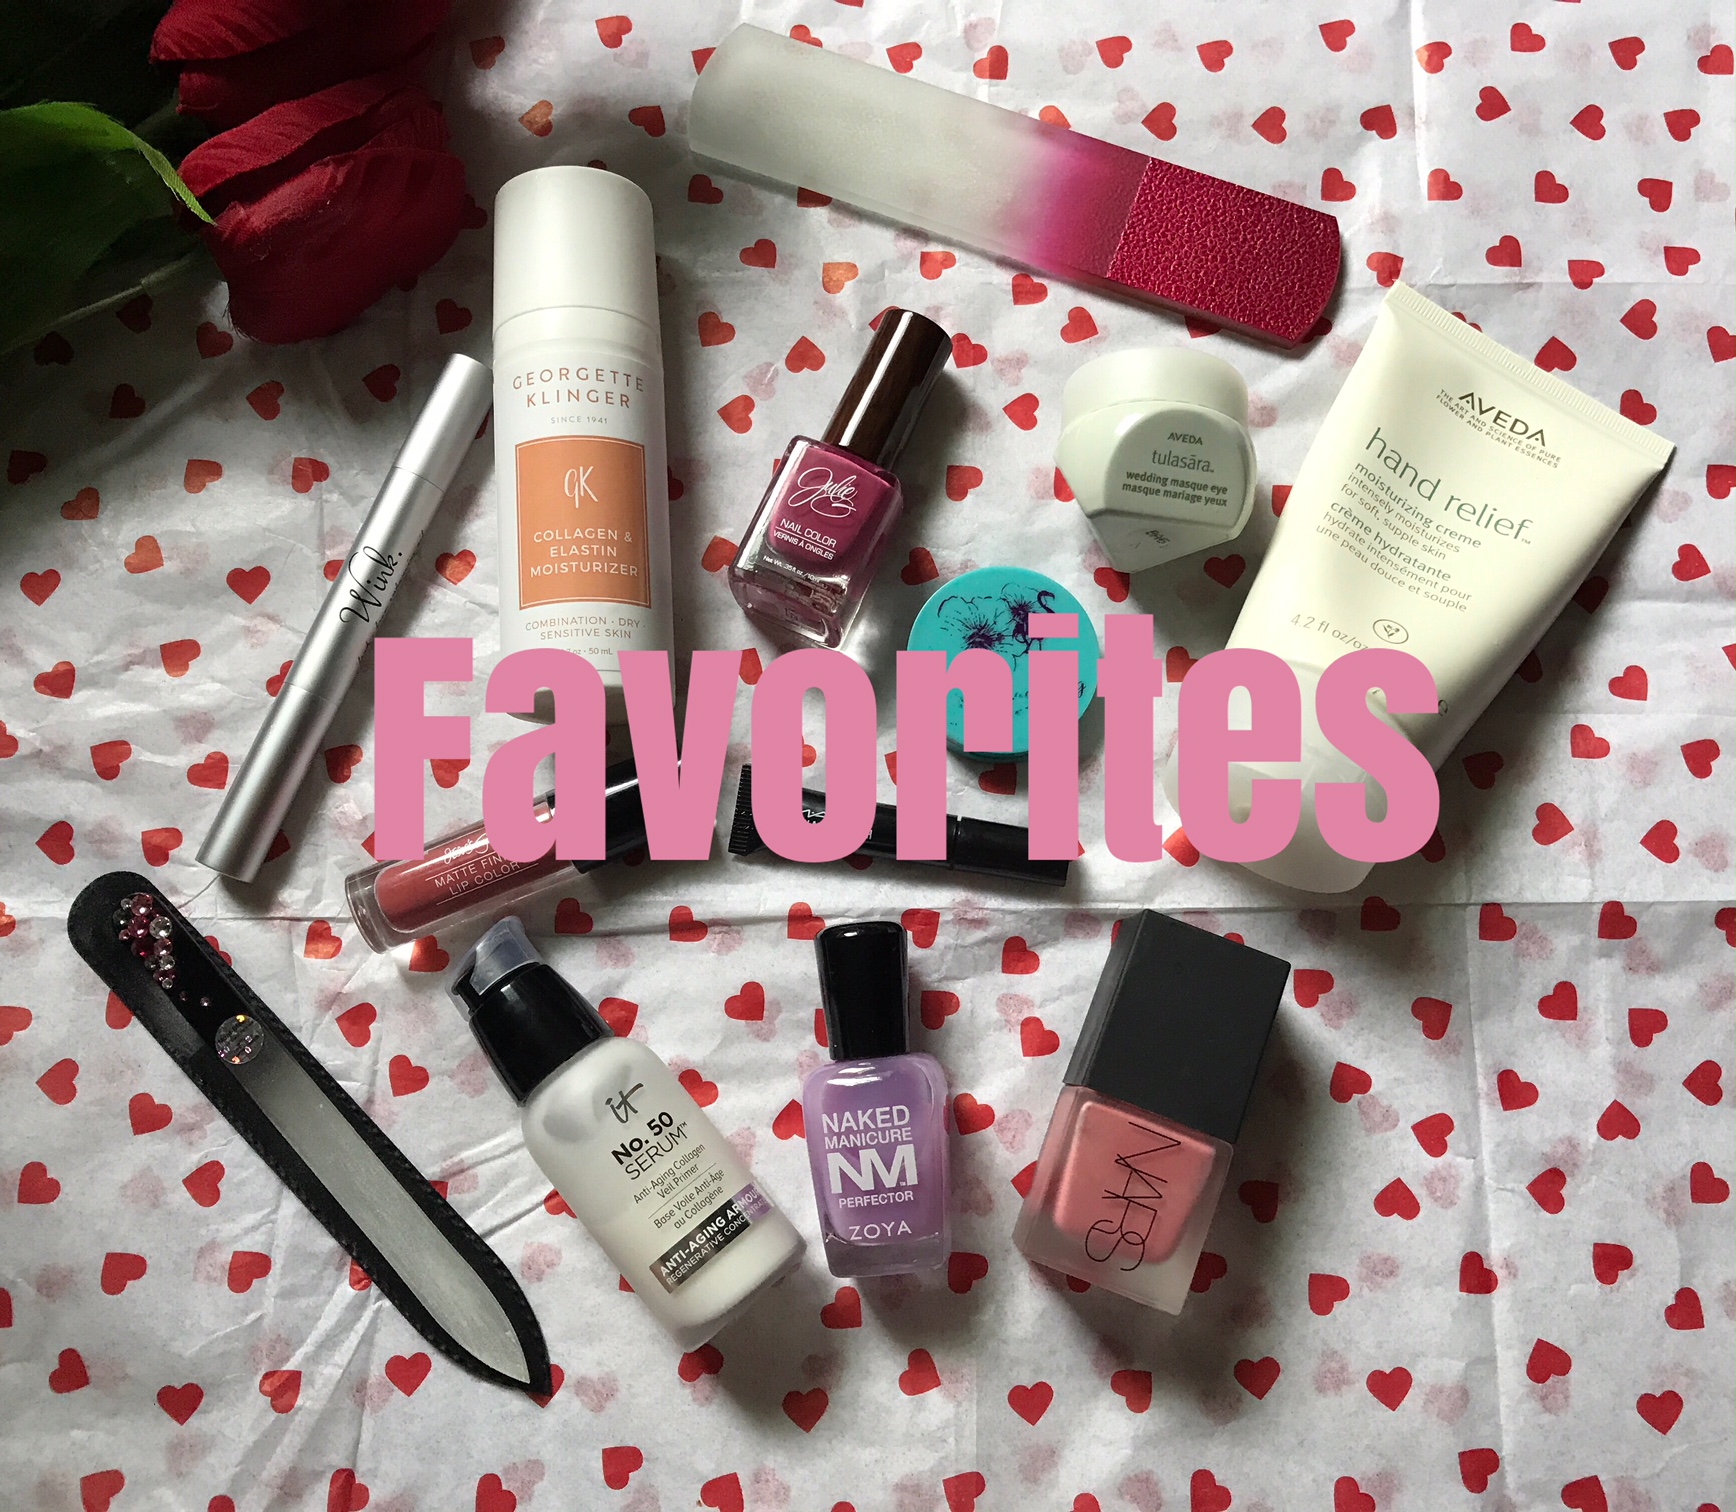 my current favorite beauty products, neversaydiebeauty.com